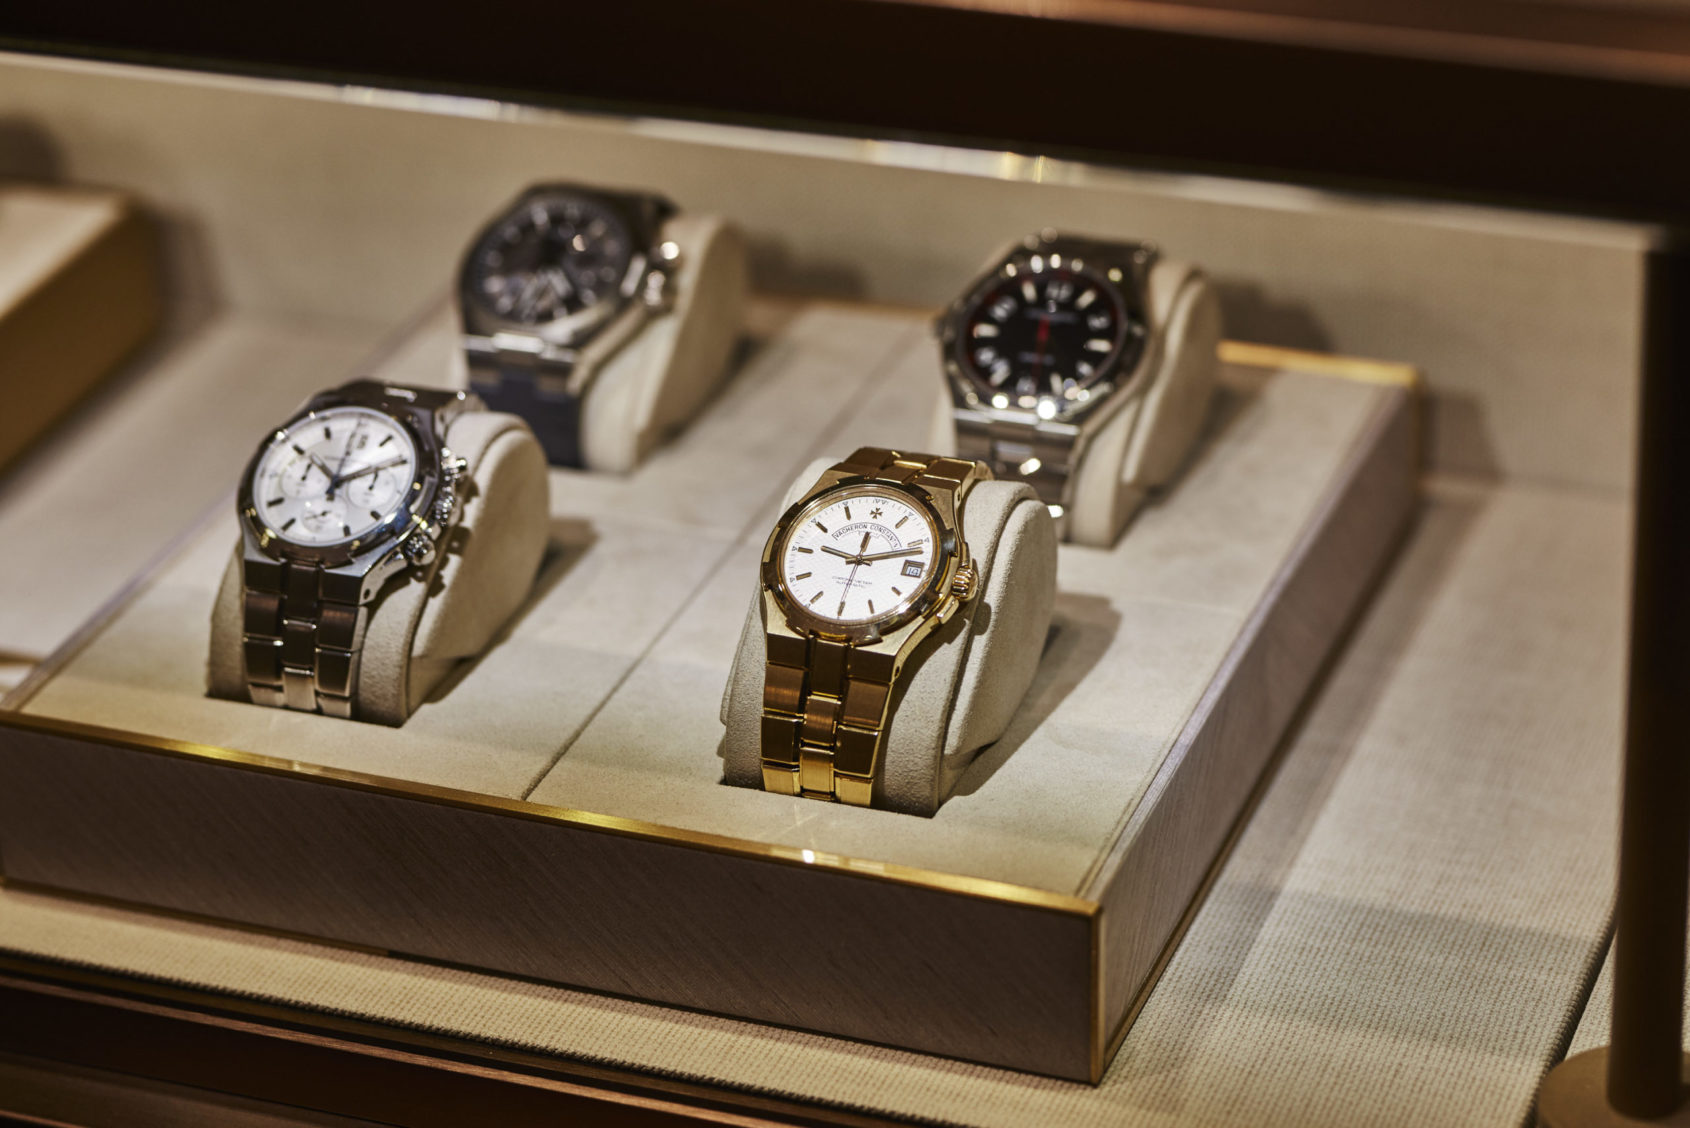 A special evening with Vacheron Constantin and the Time+Tide Club